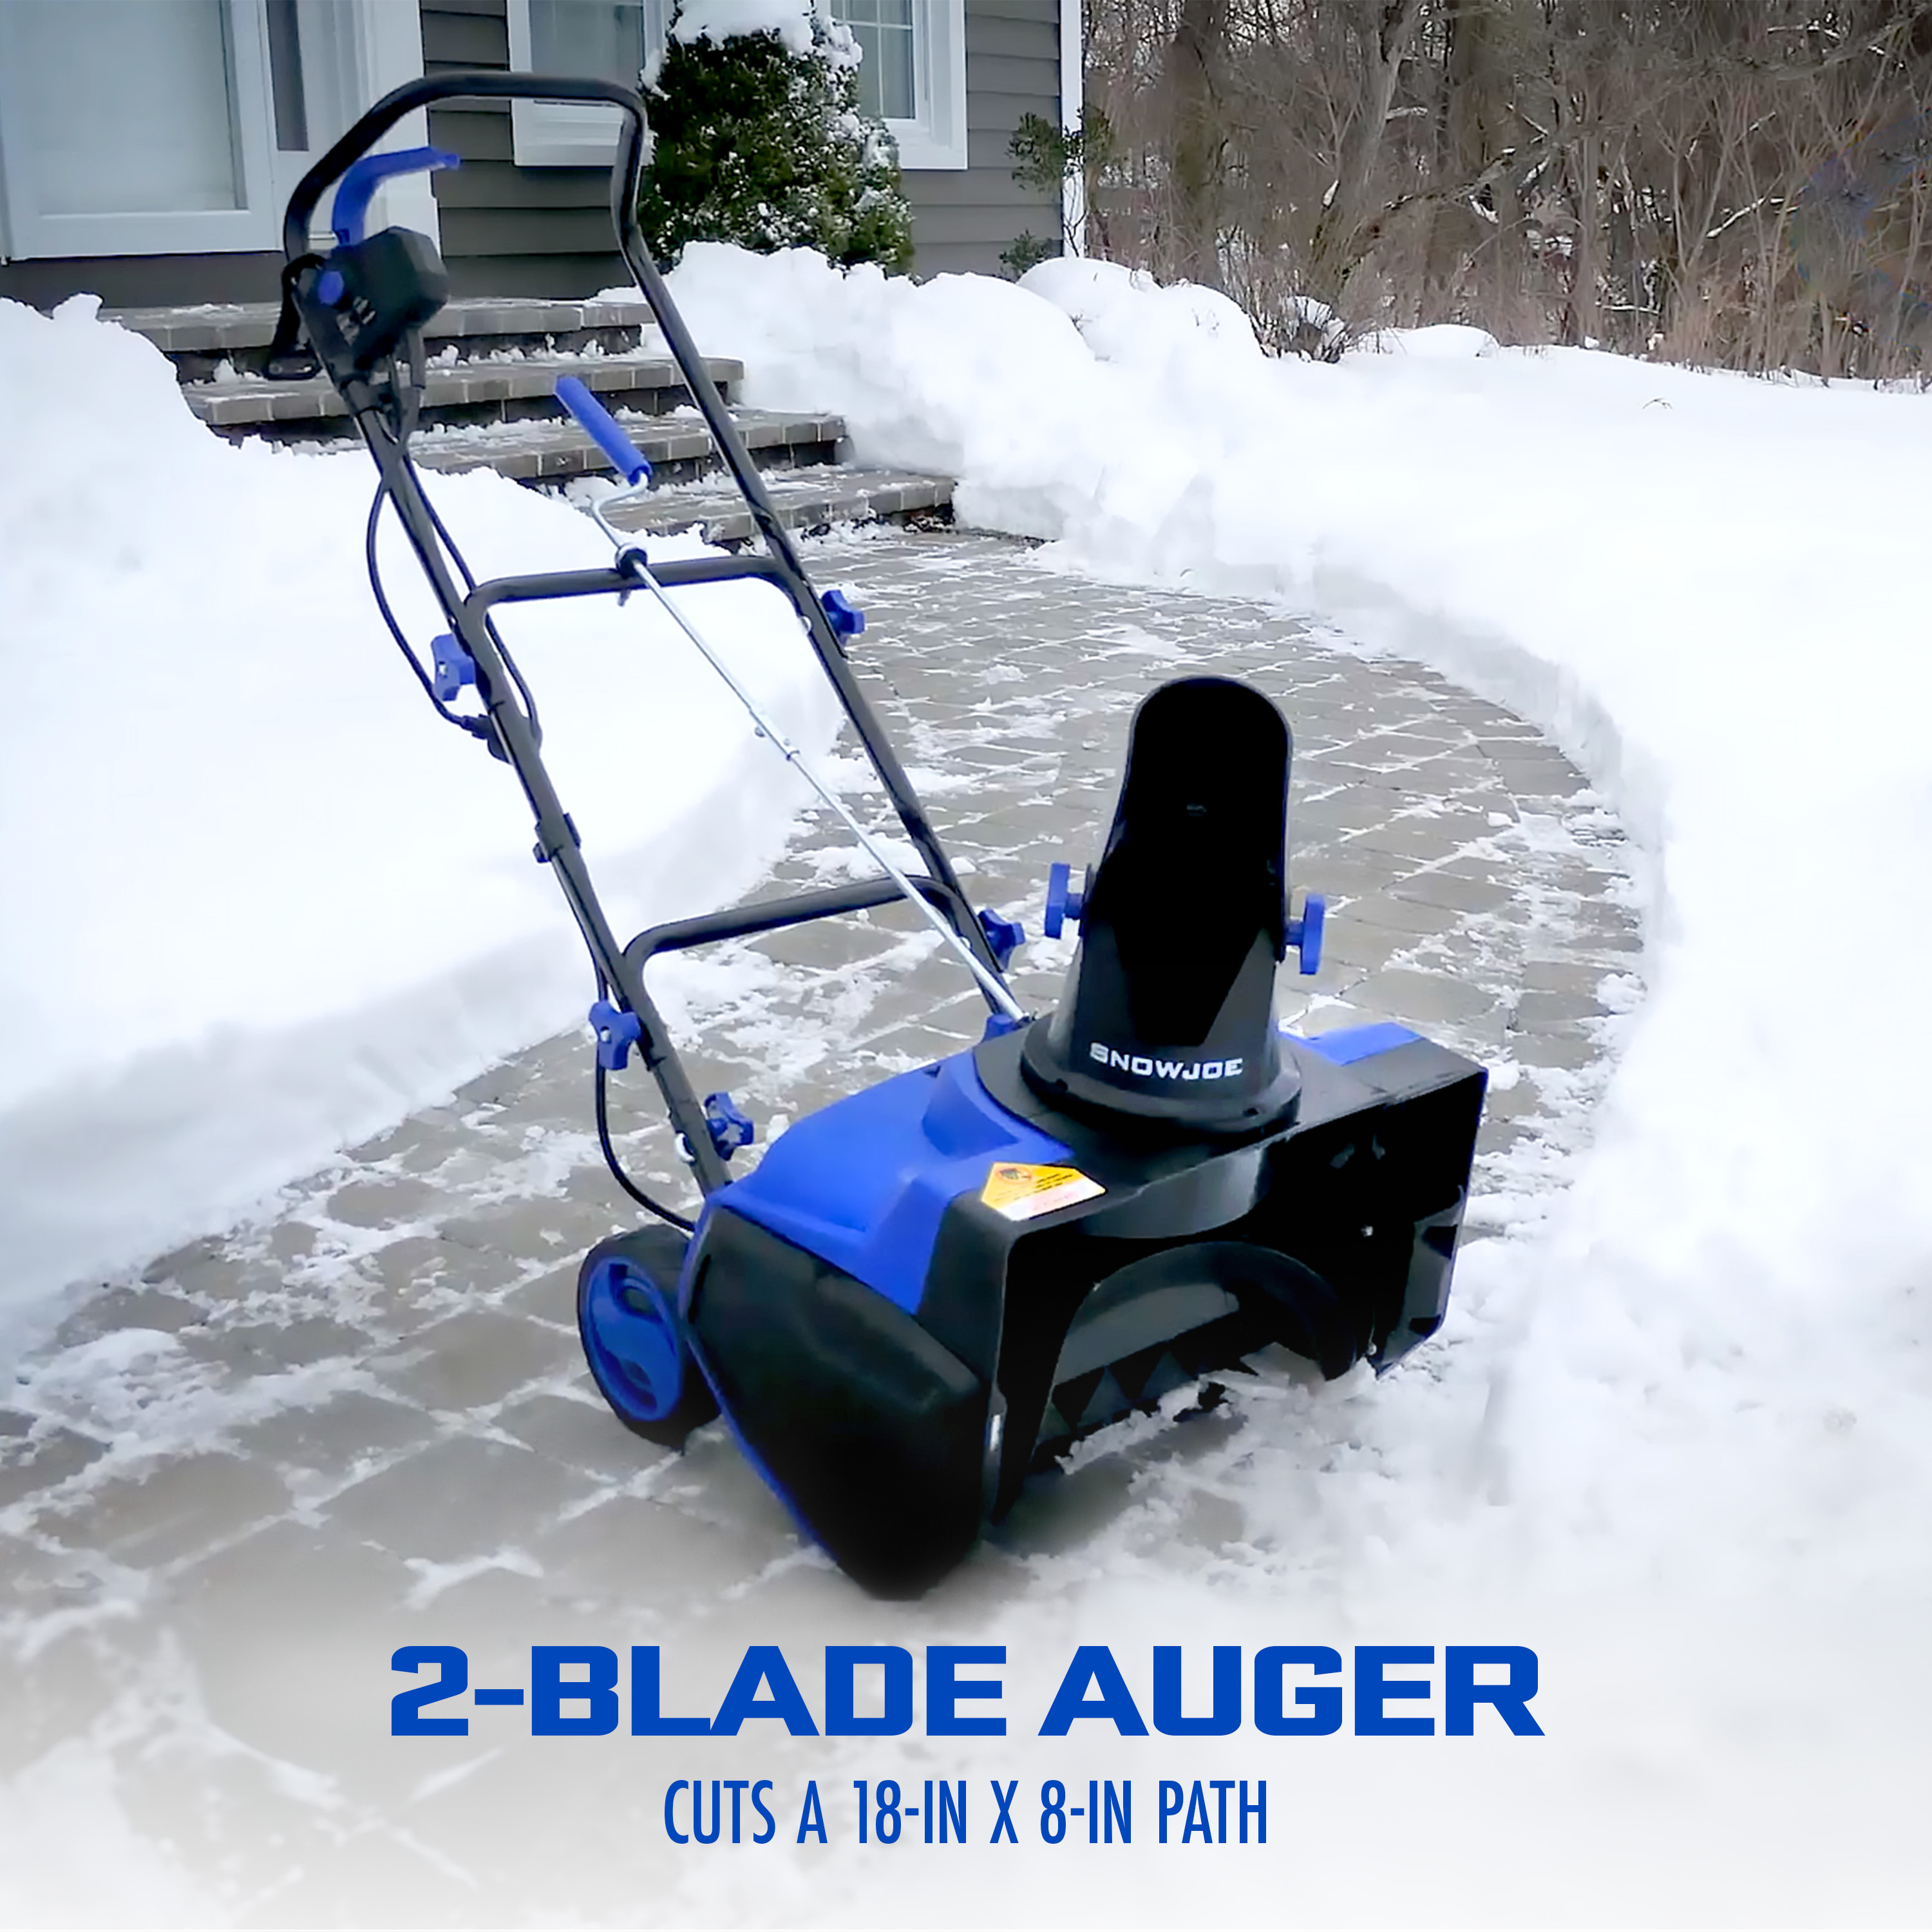 Snow Joe 18-inch Electric Single-Stage Snow Blower, 13-Amp - image 5 of 17